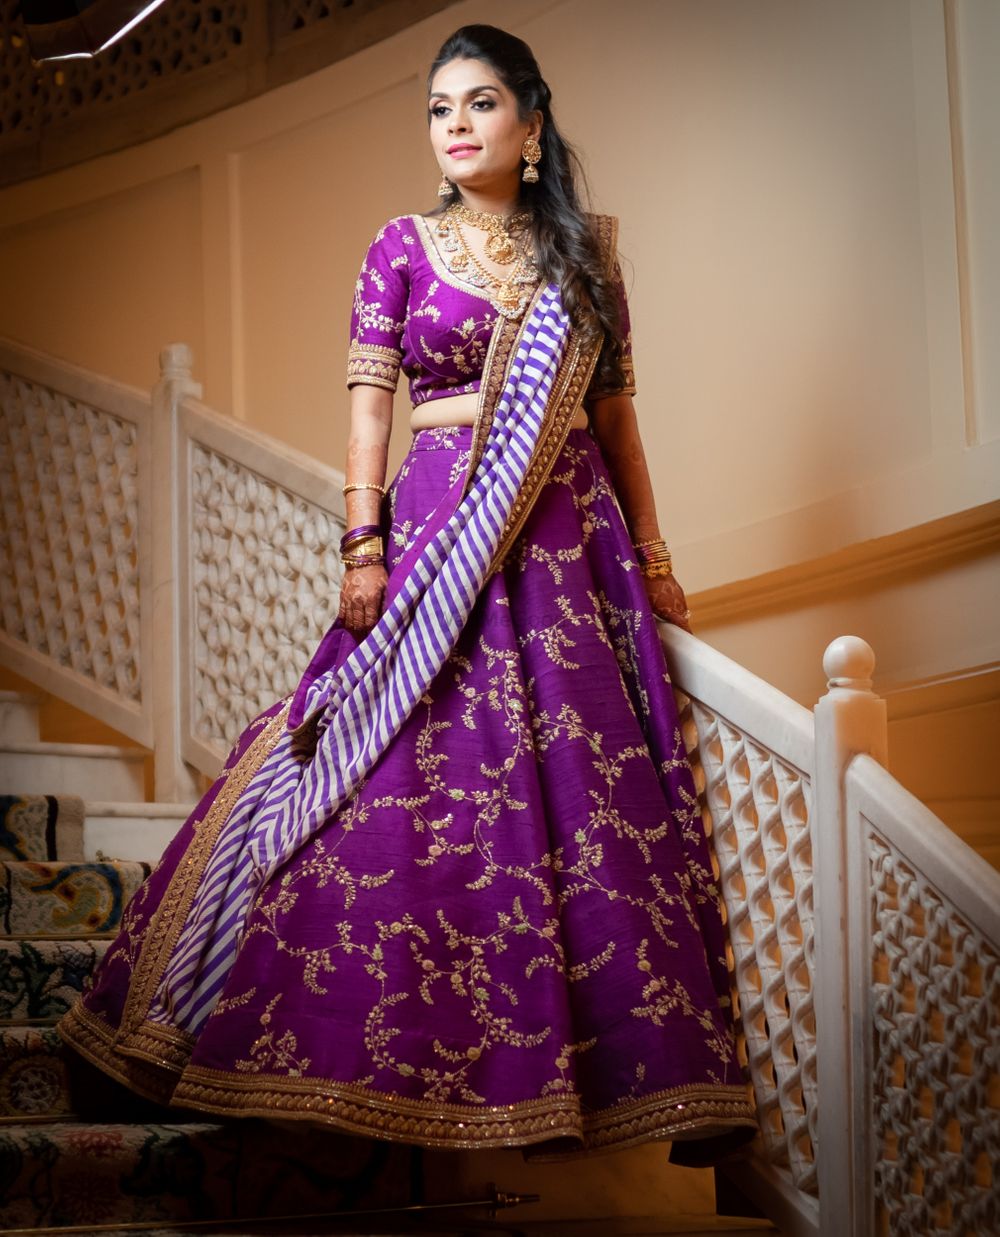 Photo of A bride in a purple lehenga for her cocktail